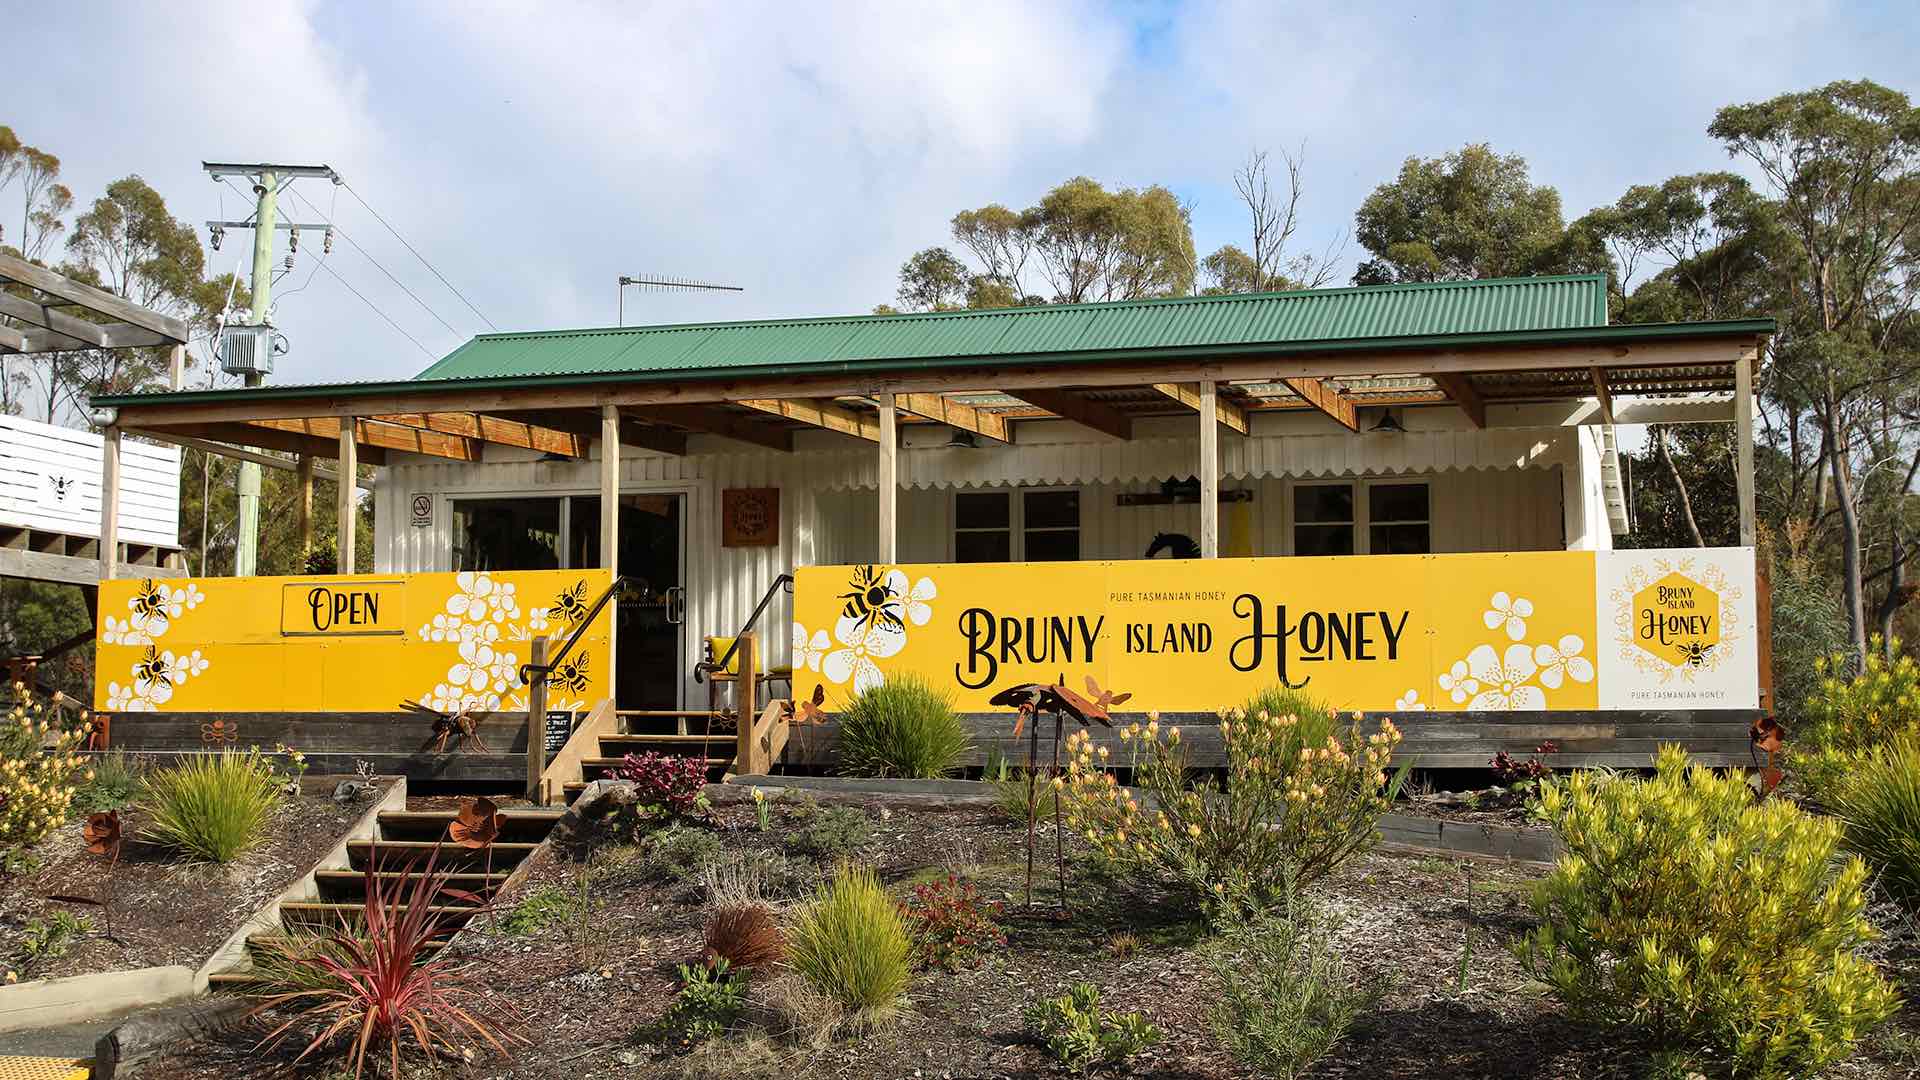 A Southern Edge Road Trip: Follow a CP Writer's Ambling Foodie Adventure in Tasmania's South